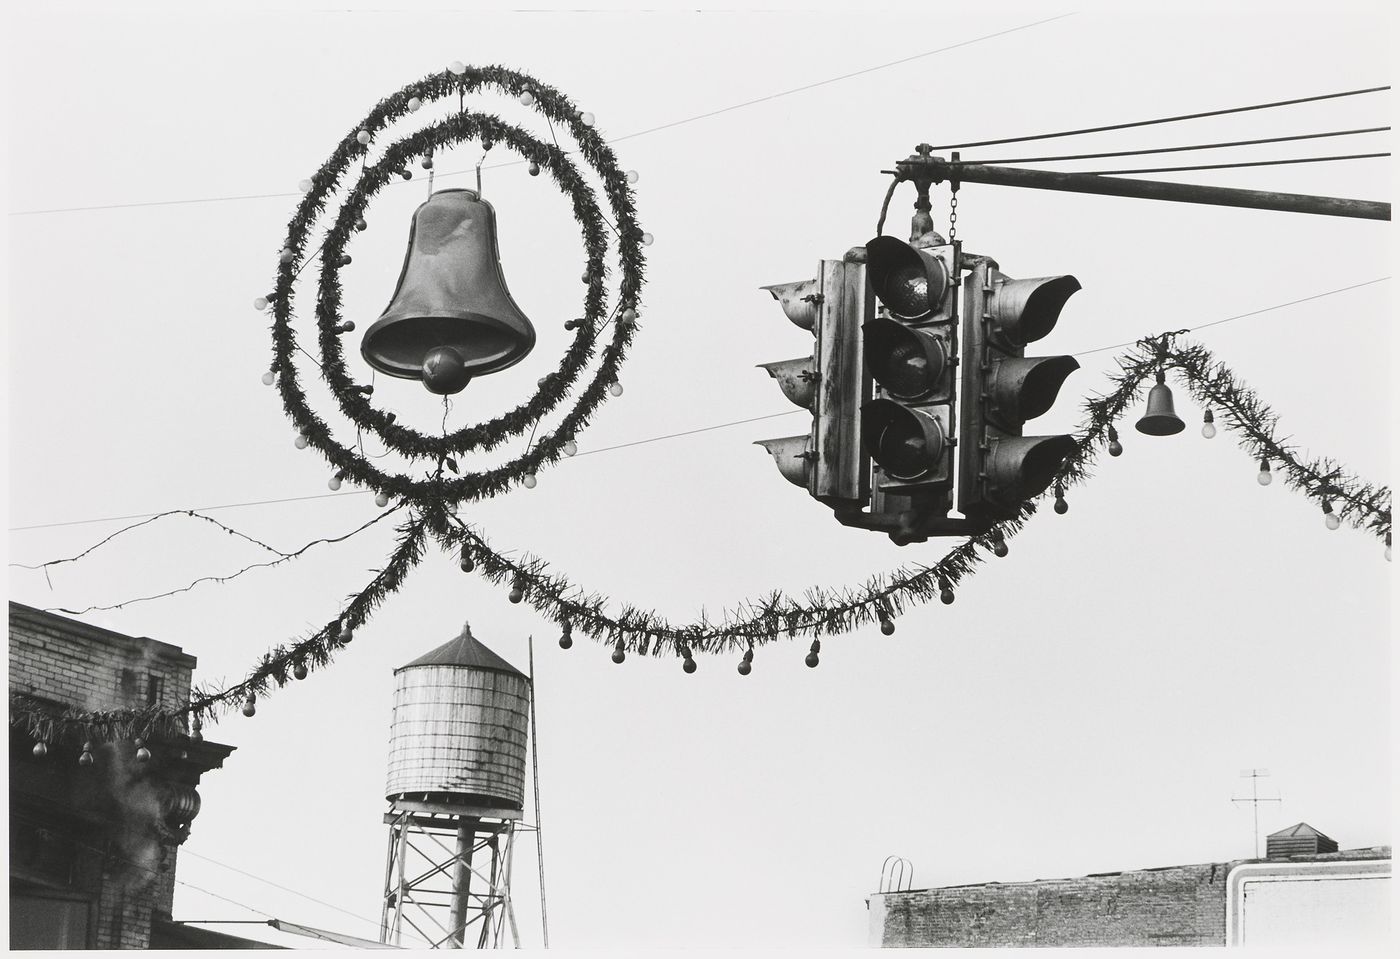 View of street decorations, including a bell, wreath, lights and garland, showing traffic signals with a water tower in the background, Hoboken, United States